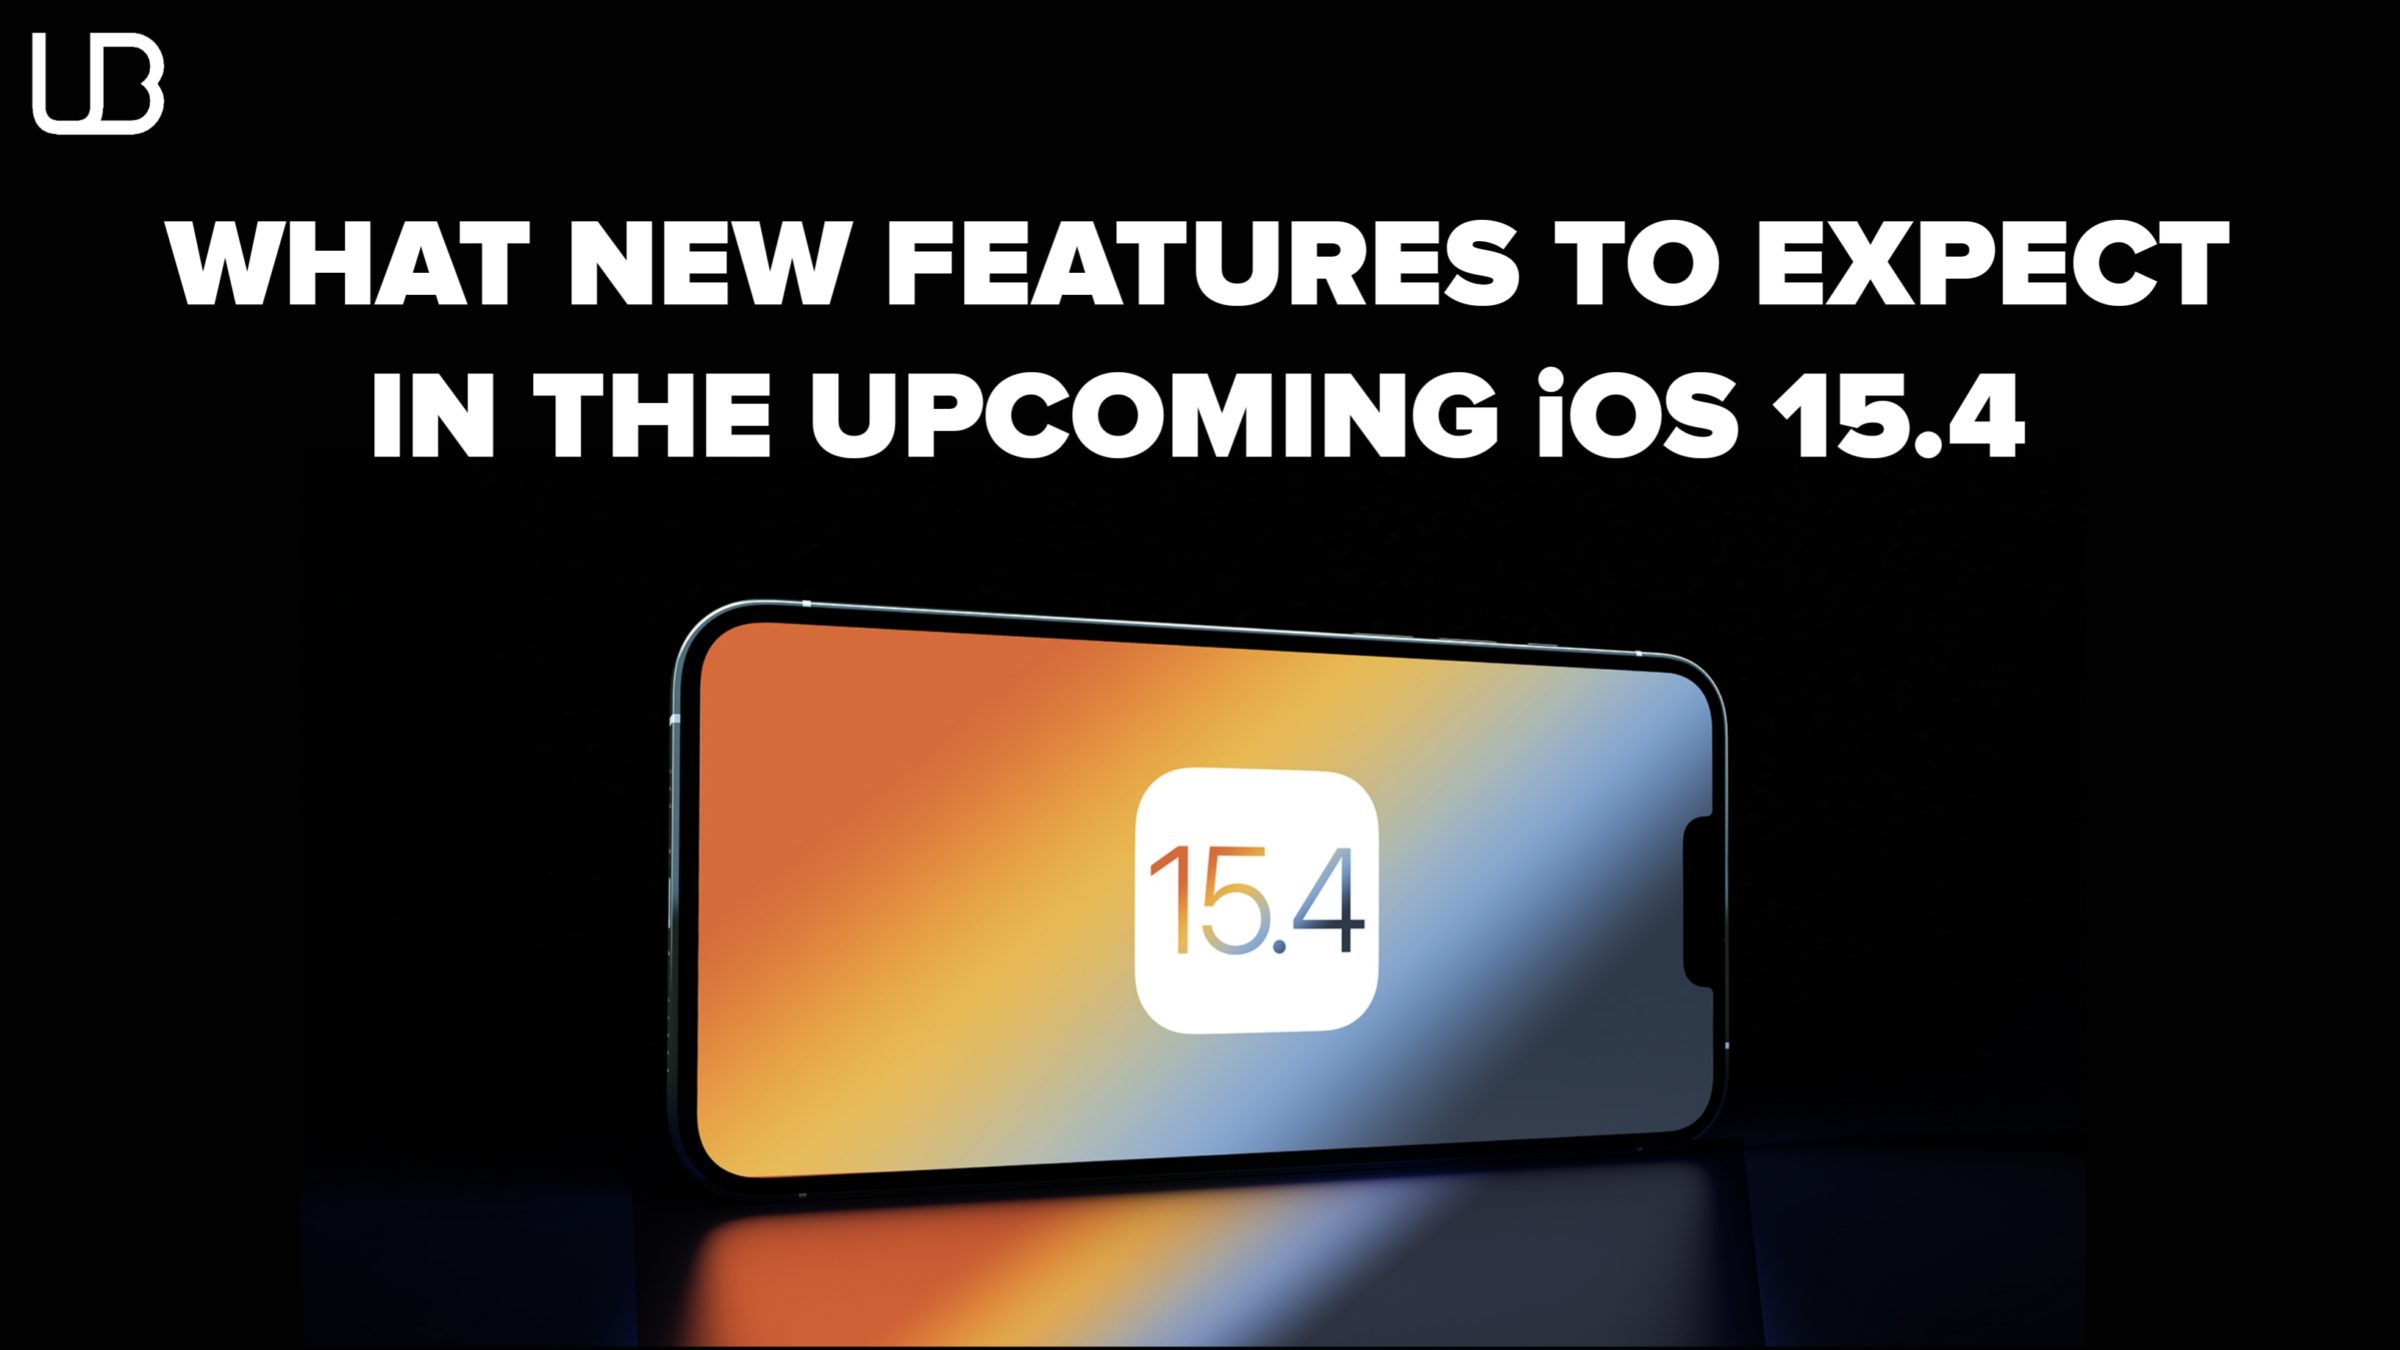 What new features to expect in the upcoming iOS 15.4